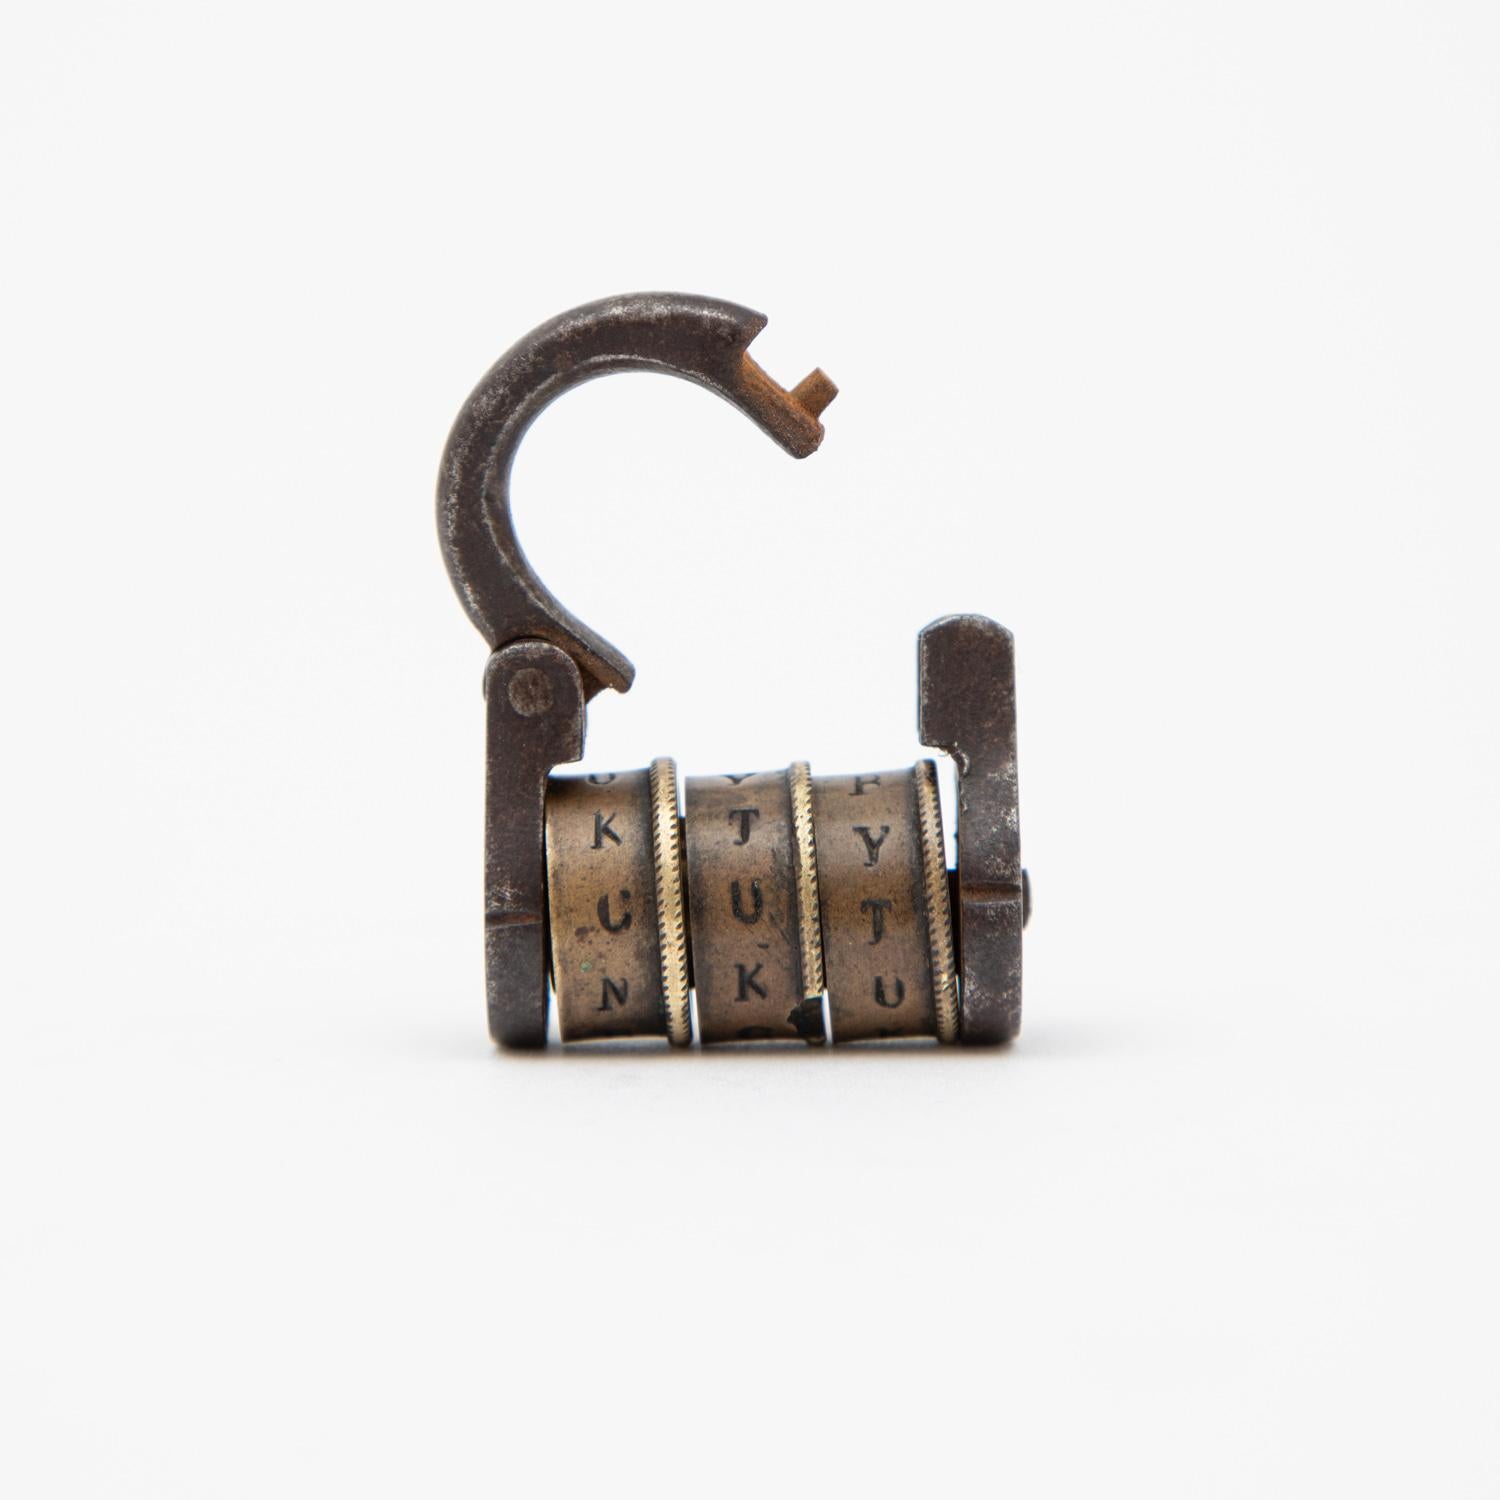 Early 19th century enchanting combination padlock.

It is in full working order, the three brass barrels spell CUT to release the steel loop.